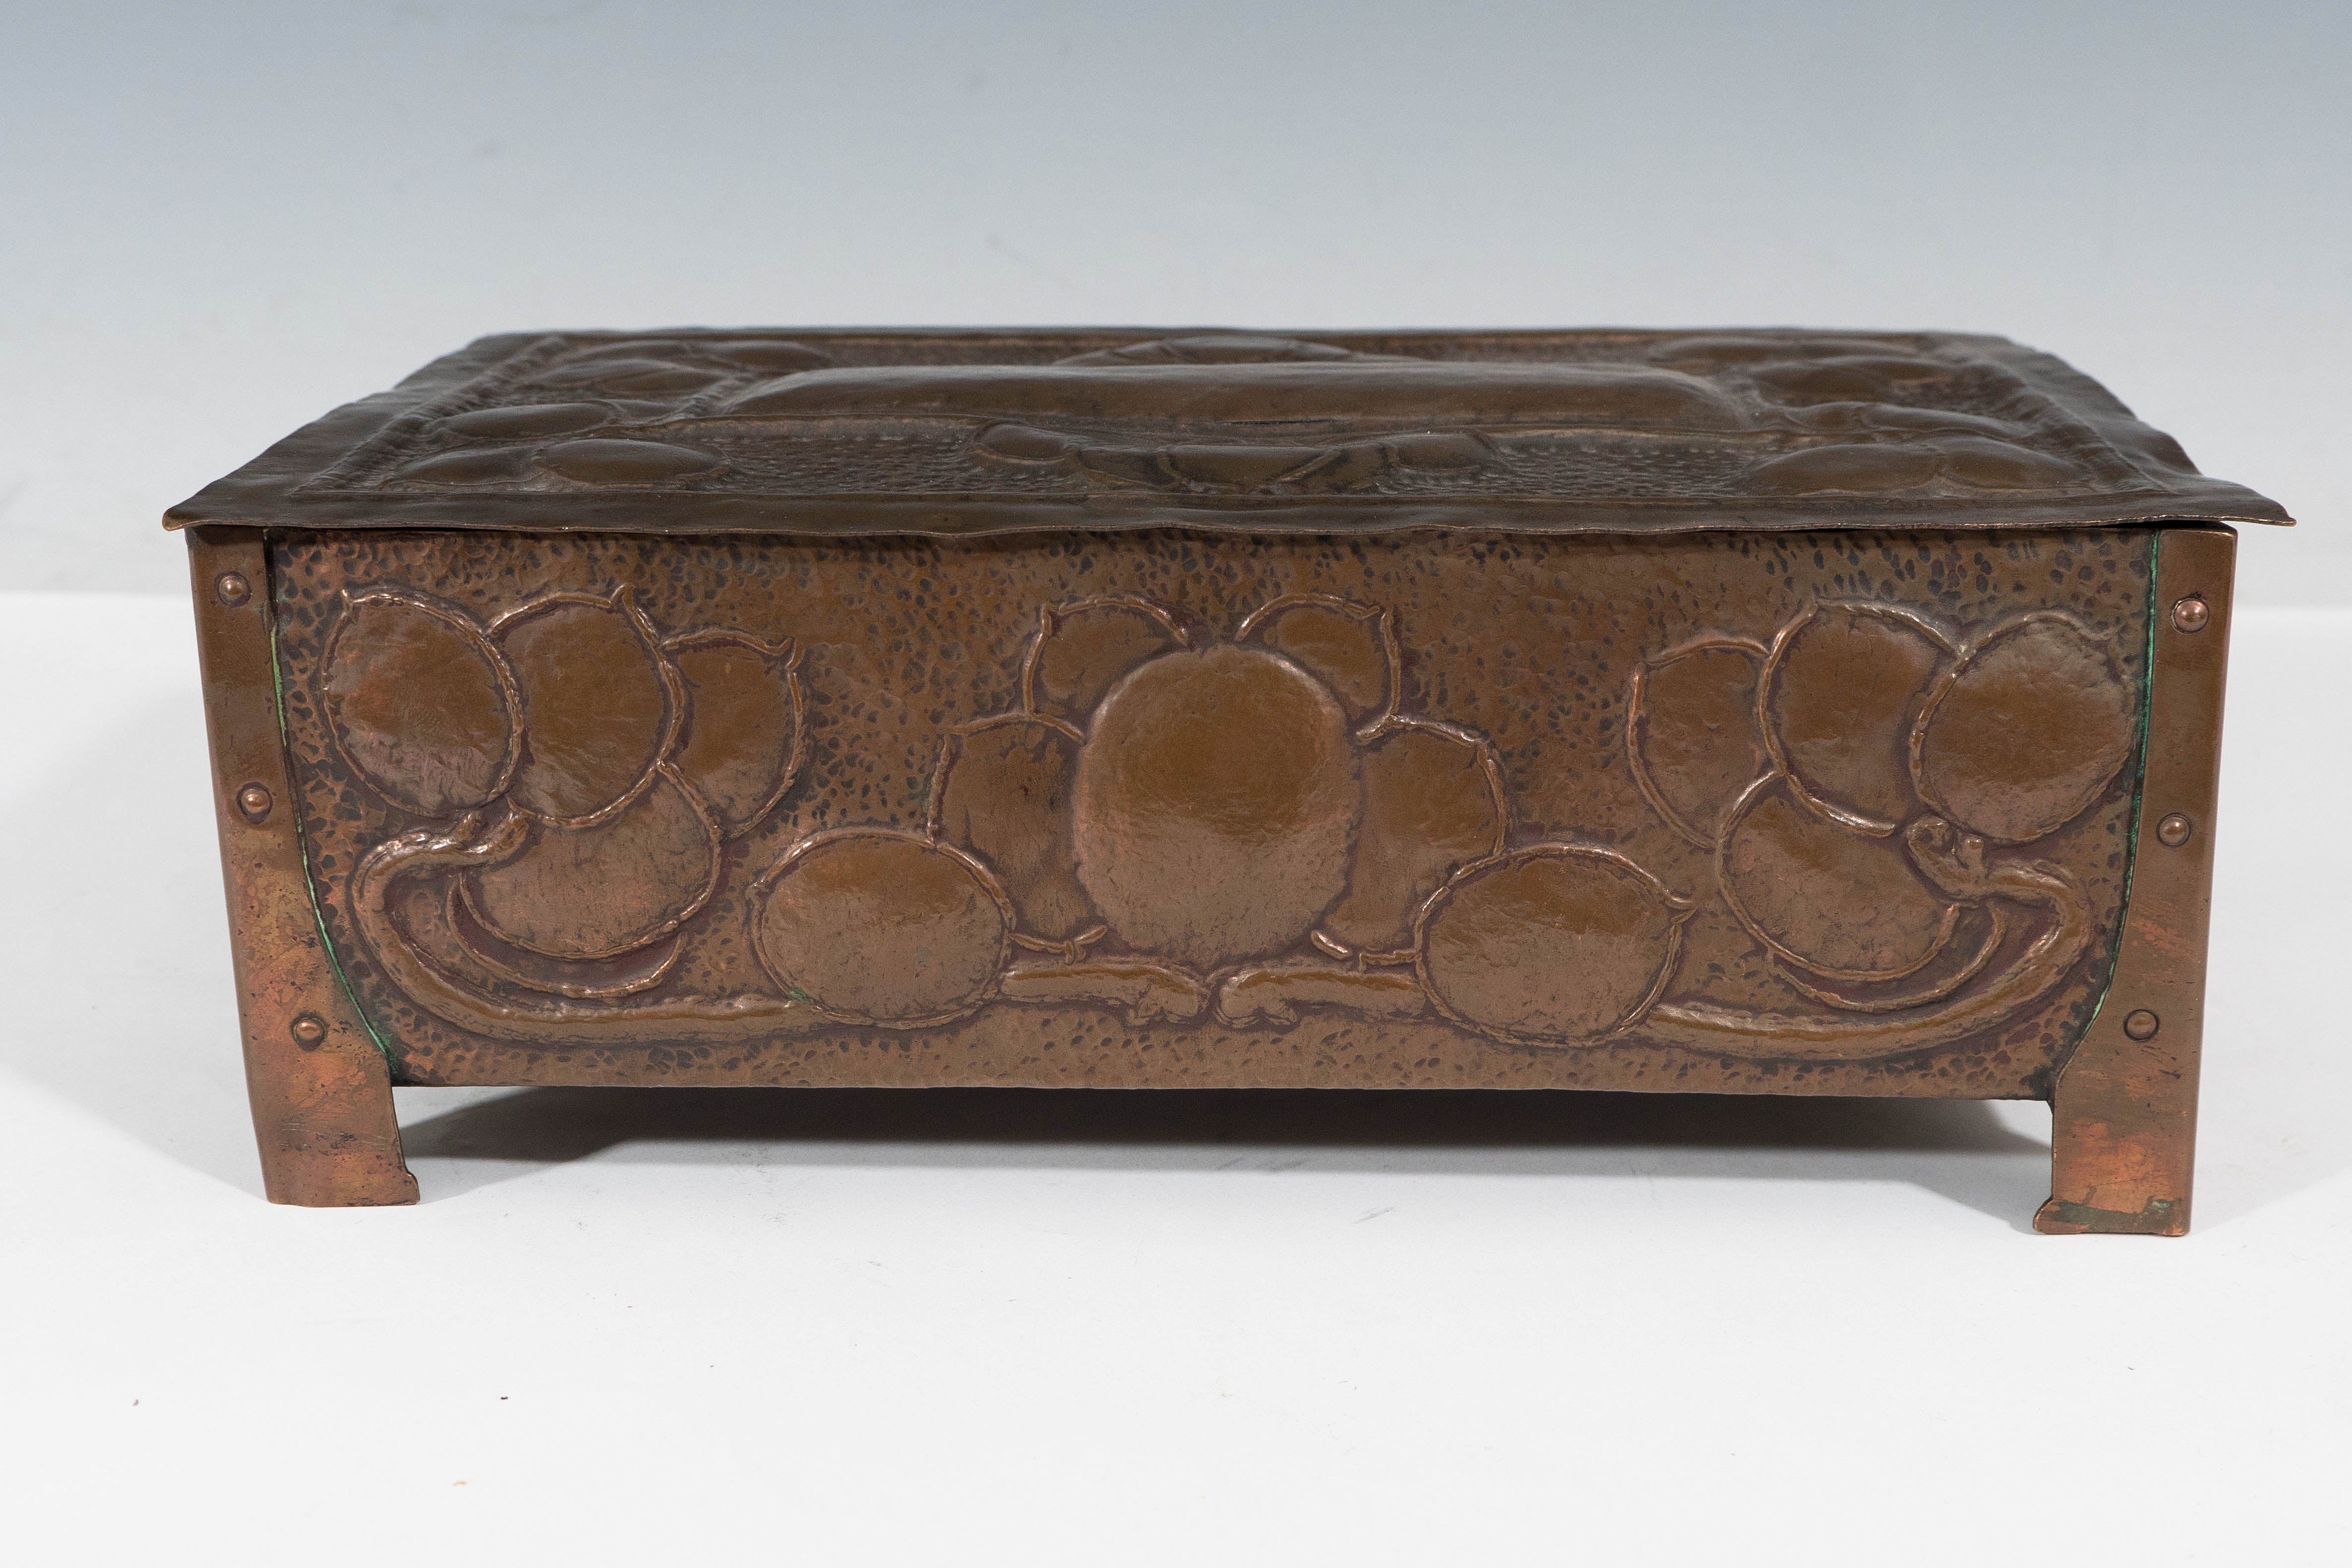 A vintage English copper box, produced within the Arts & Crafts movement, circa early 20th century, decorated to all sides with repousse details of fruit and curling vines, against a hammered ground; interior lined with gold colored velvet. Good